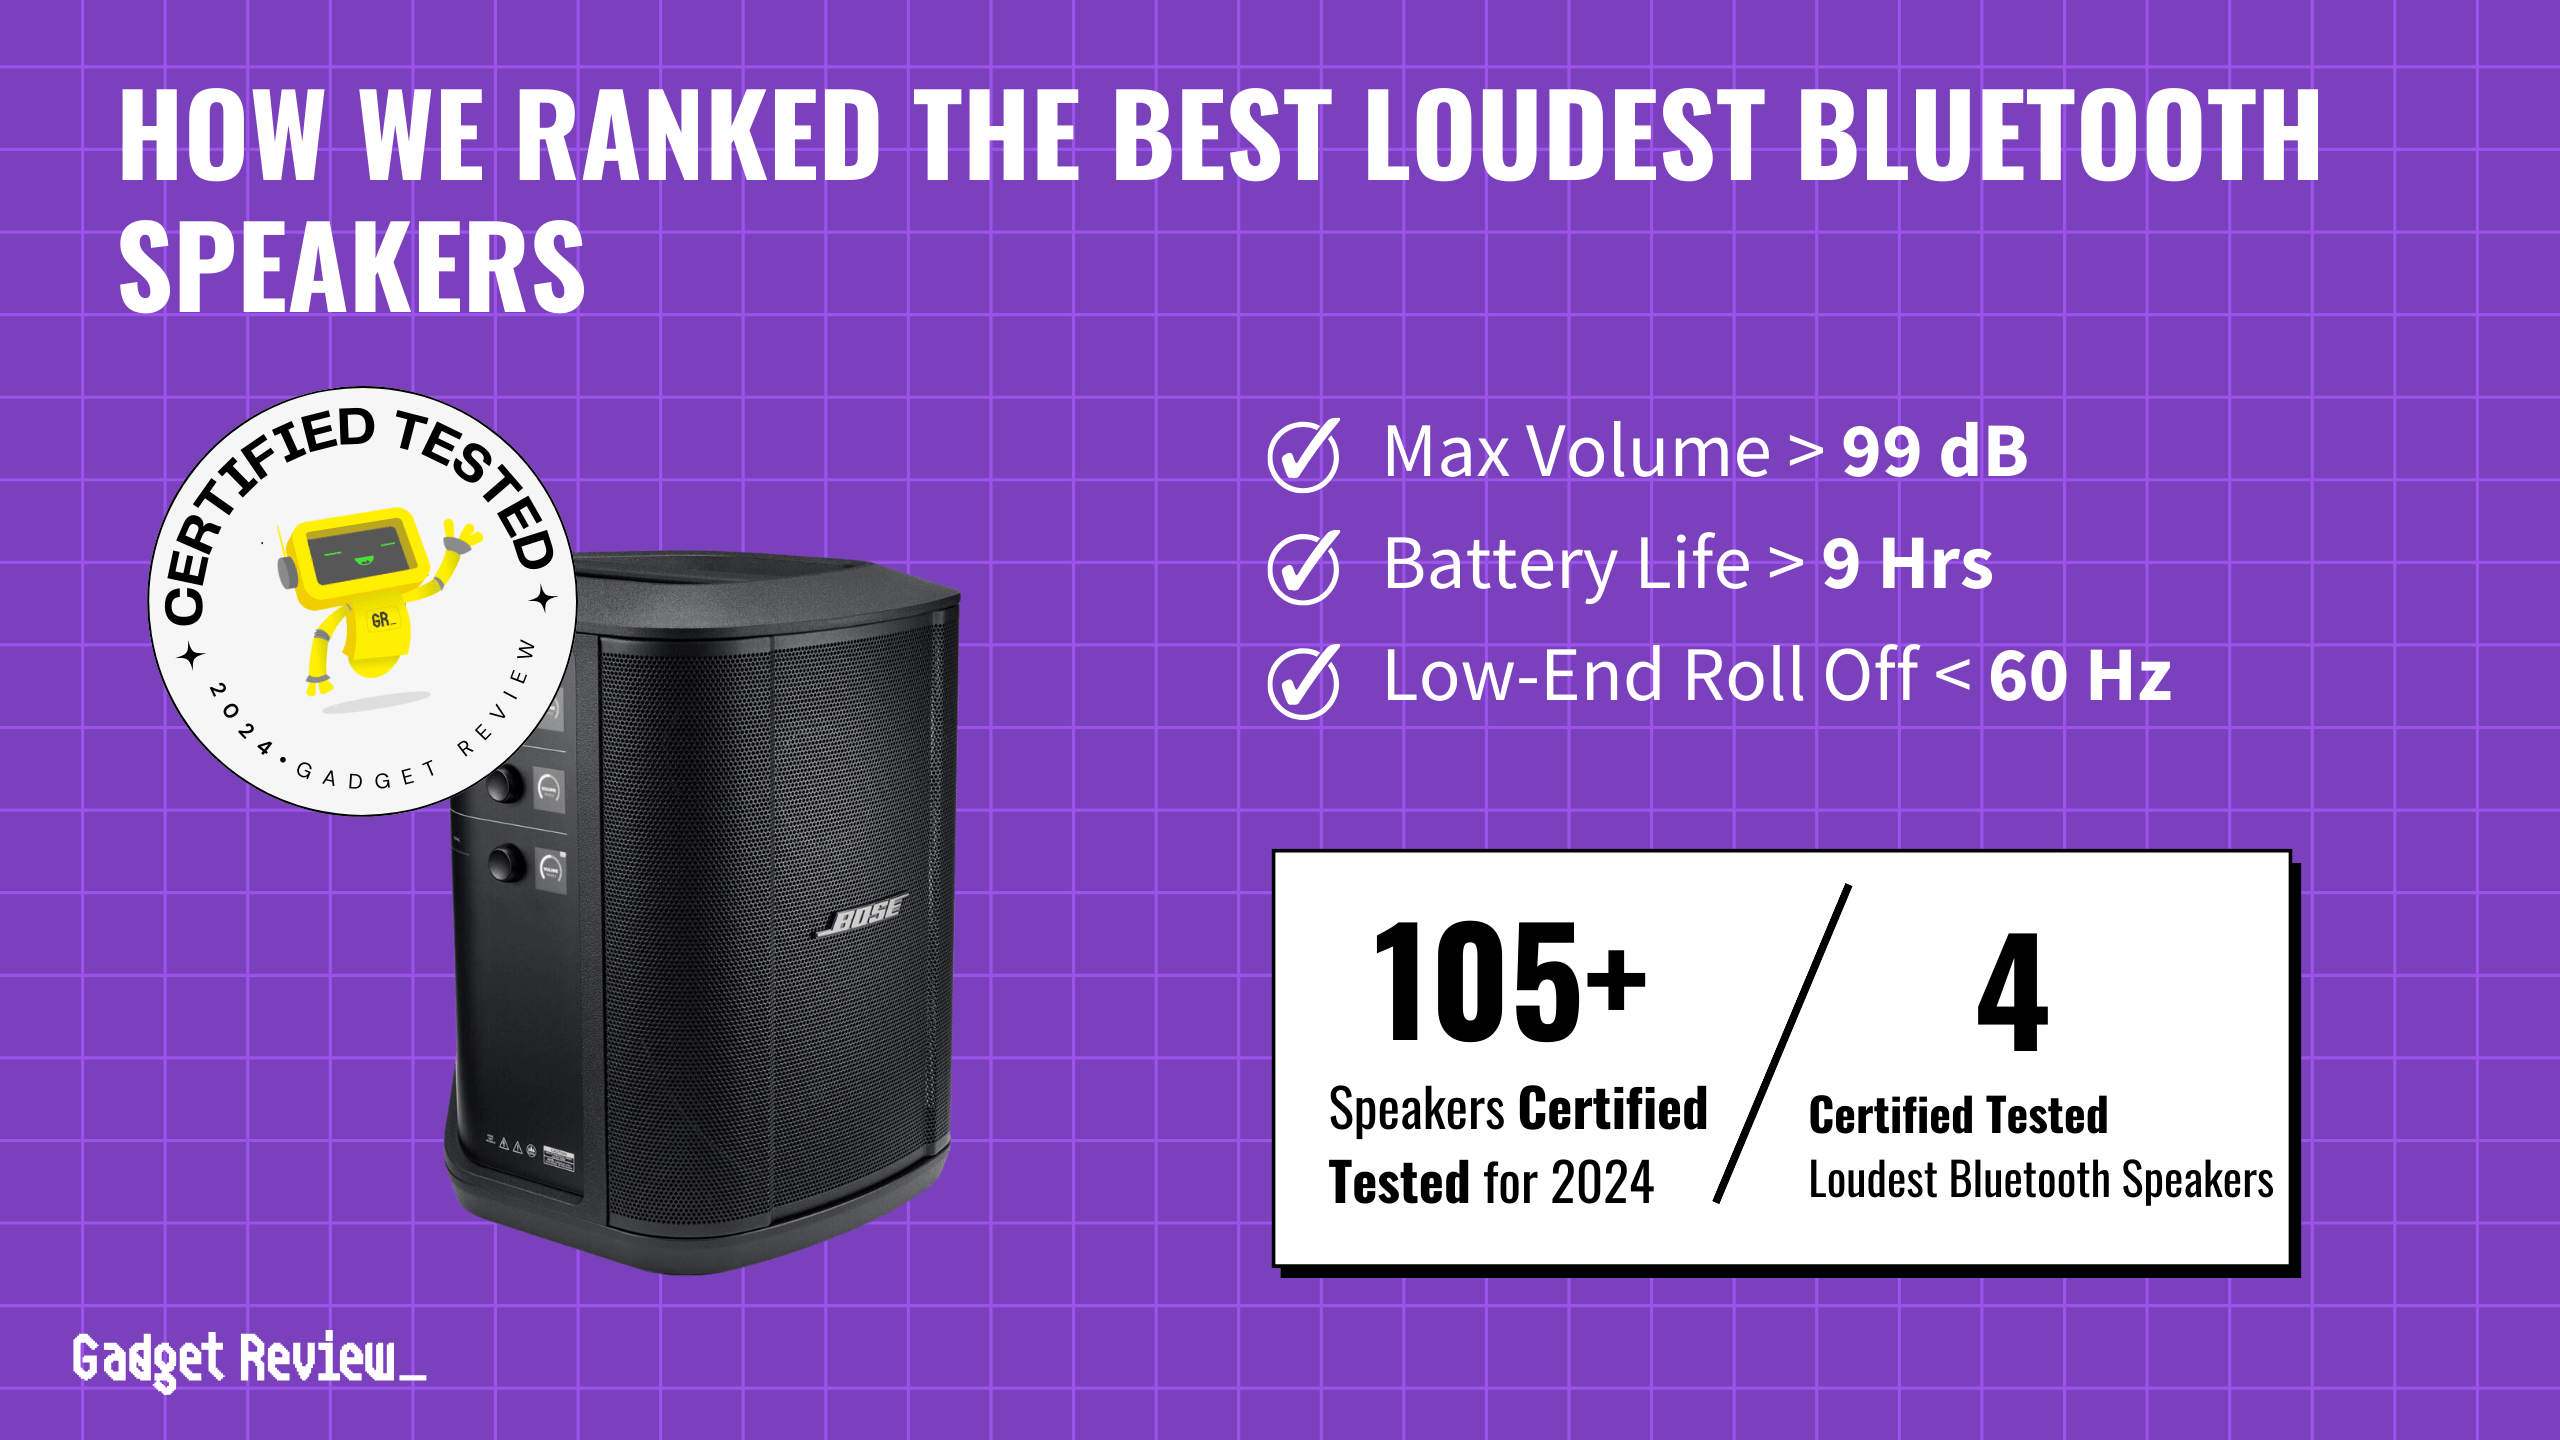 How We Ranked The 4 Loudest Bluetooth Speakers